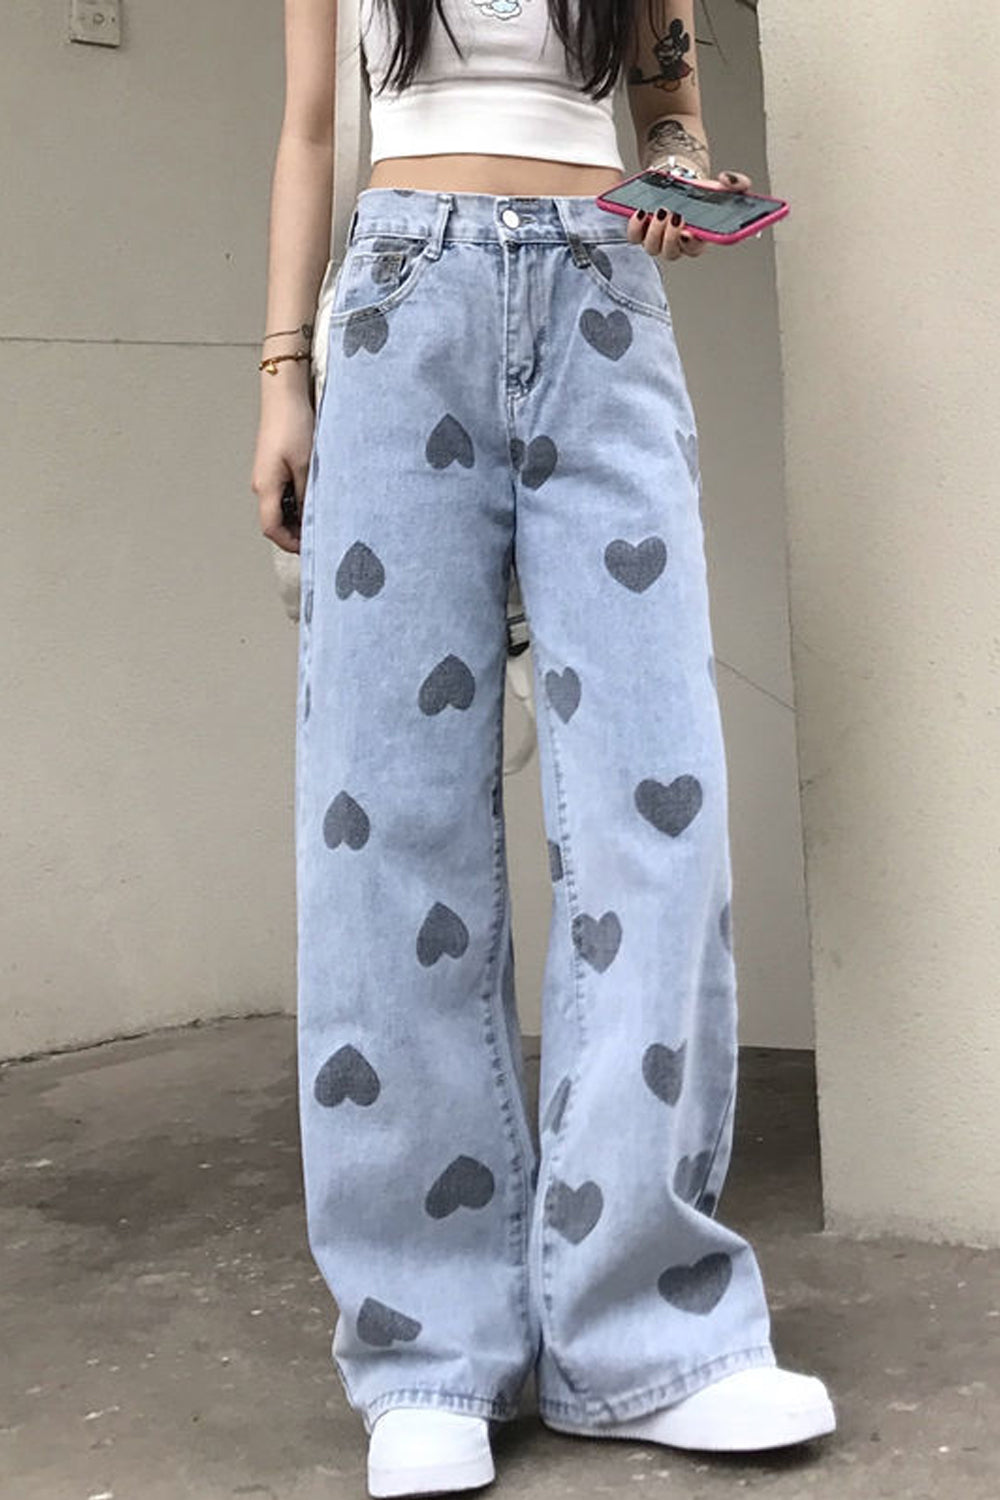 Heart Print Jeans for Girls Heart Print Jeans for Women Fashion